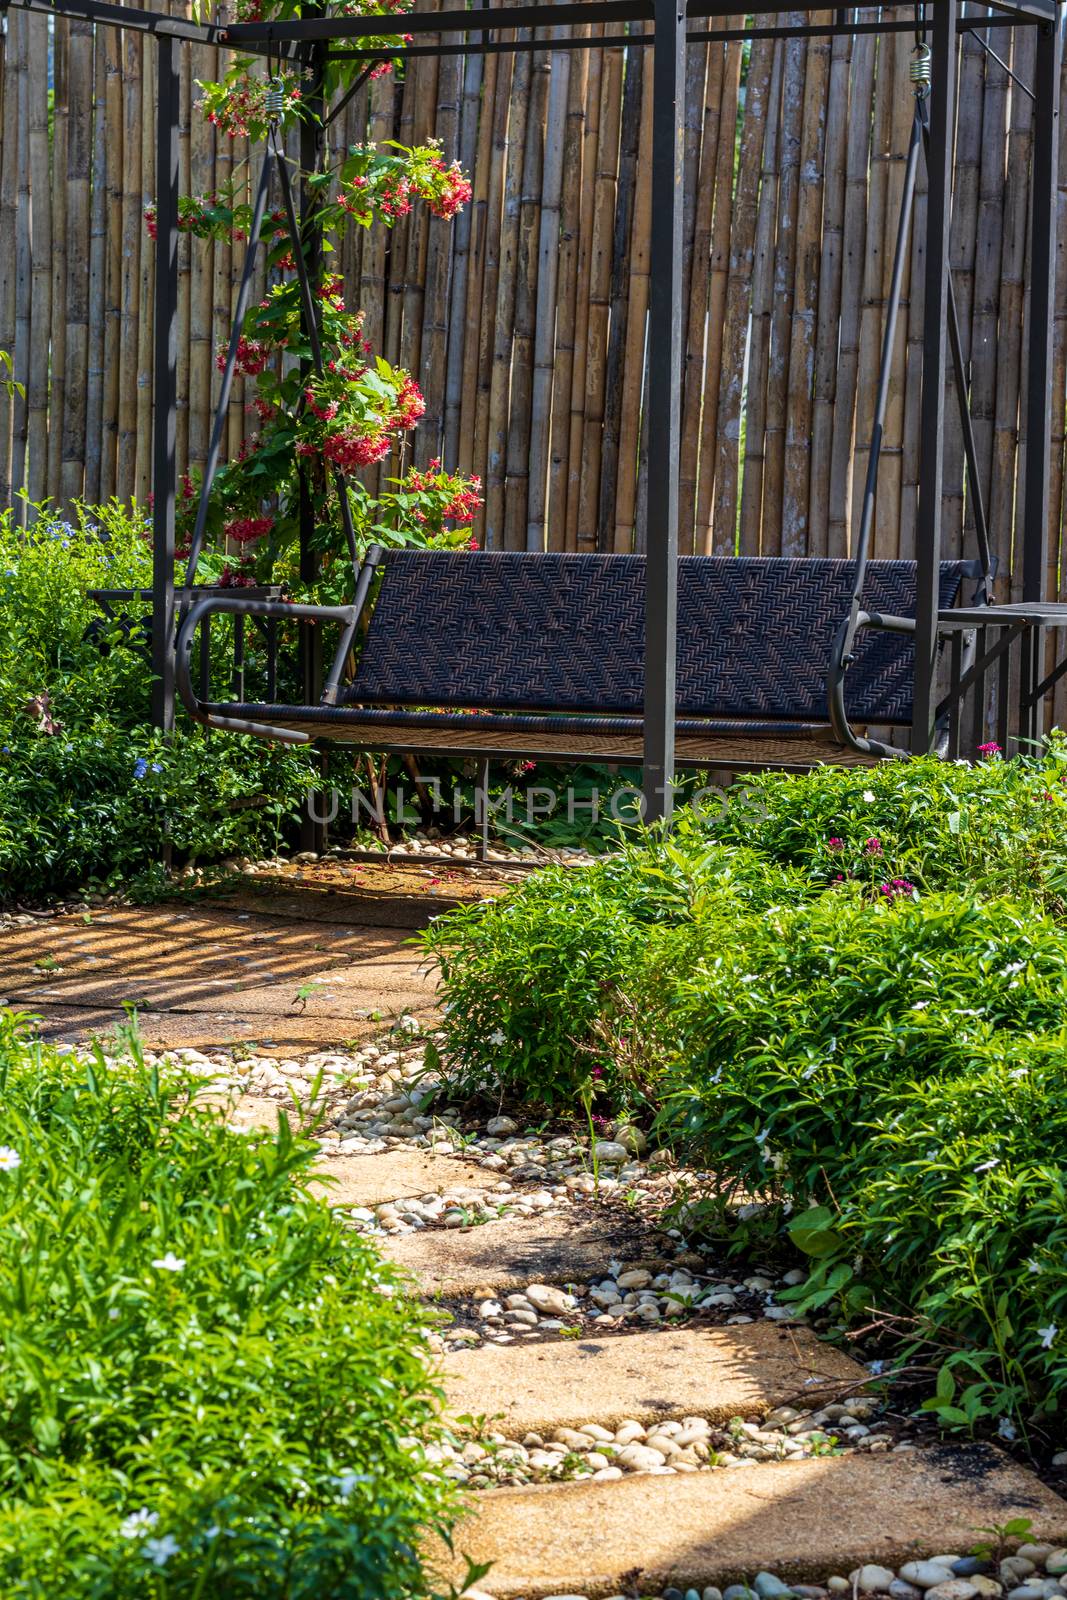 Art bench and flowers in the garden and footpath bettween green  by Khankeawsanan